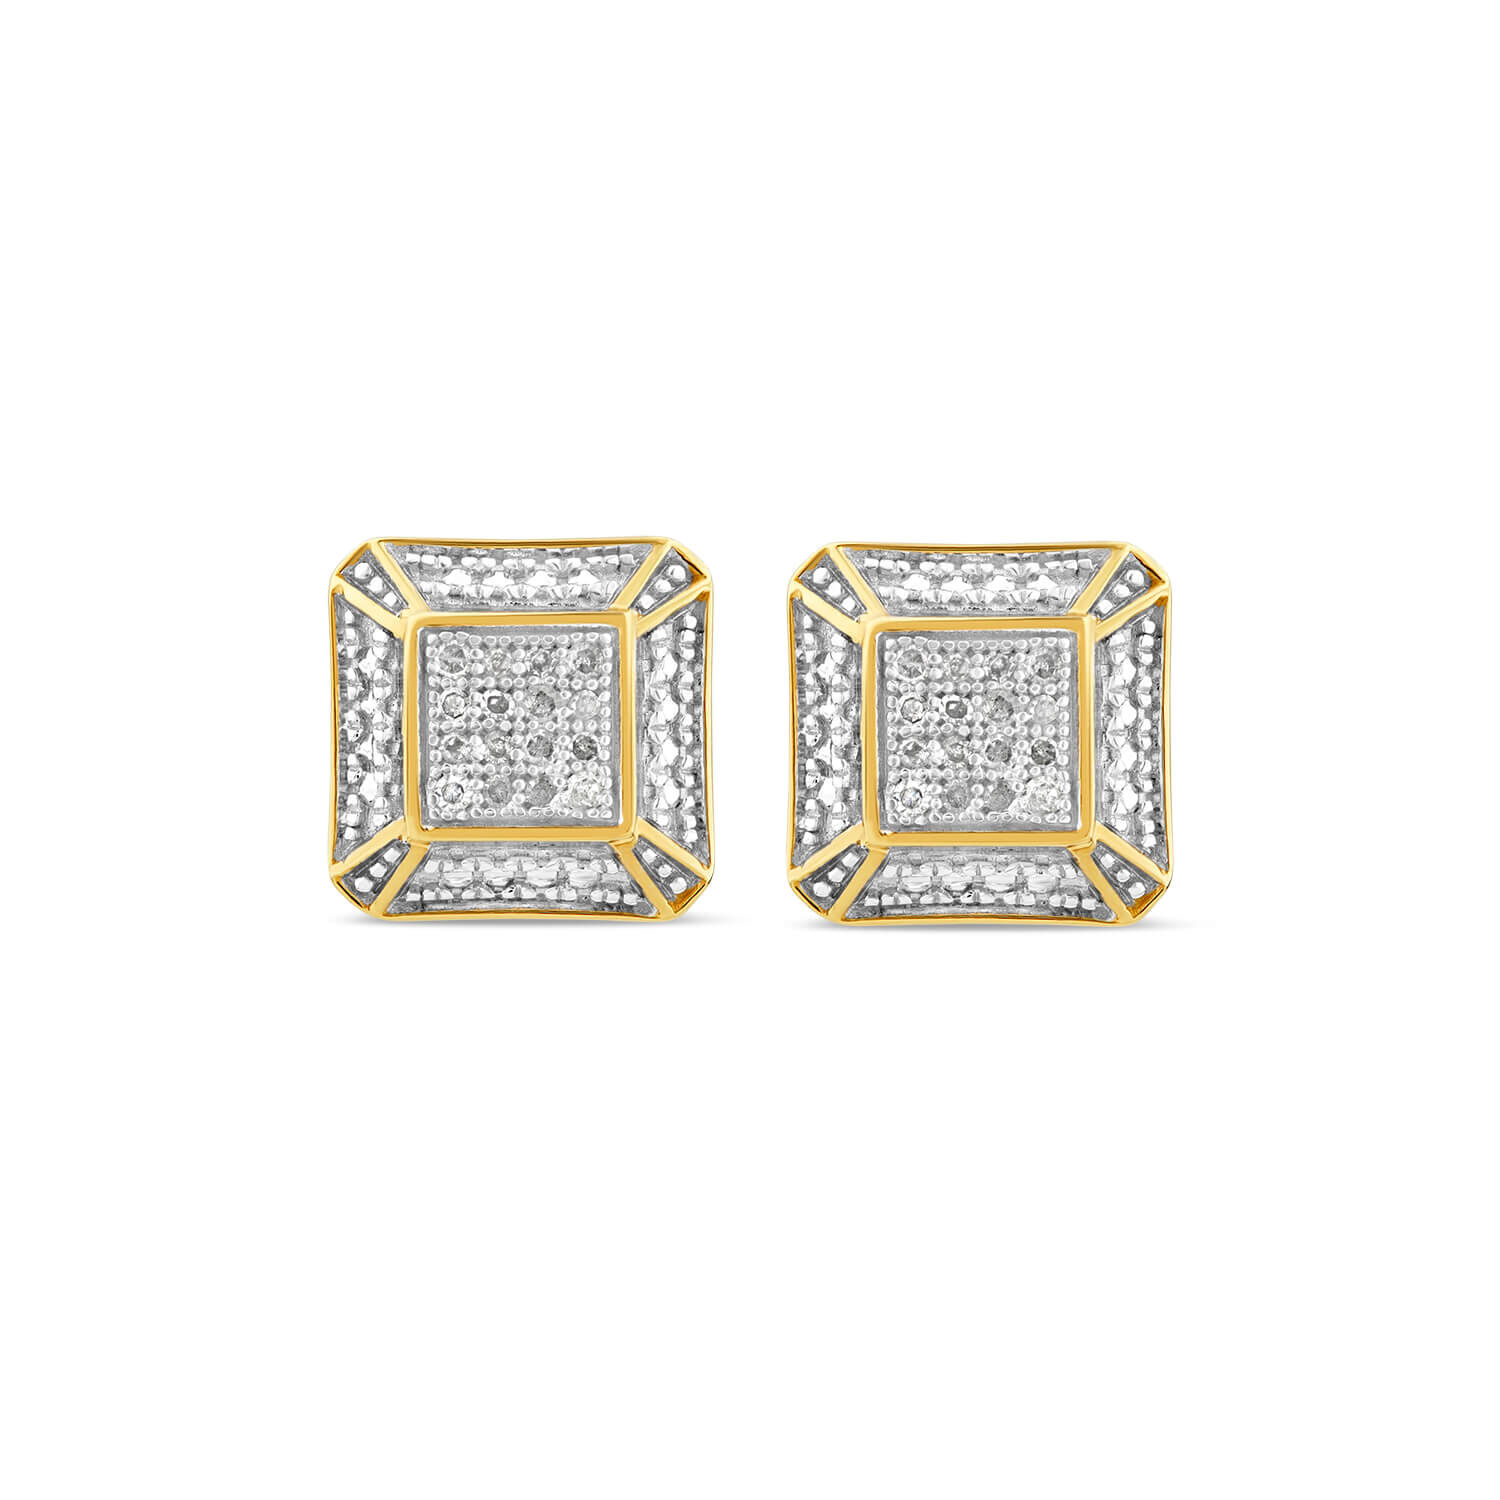 18ct yellow gold earring with 0.38ct diamond| Online UK